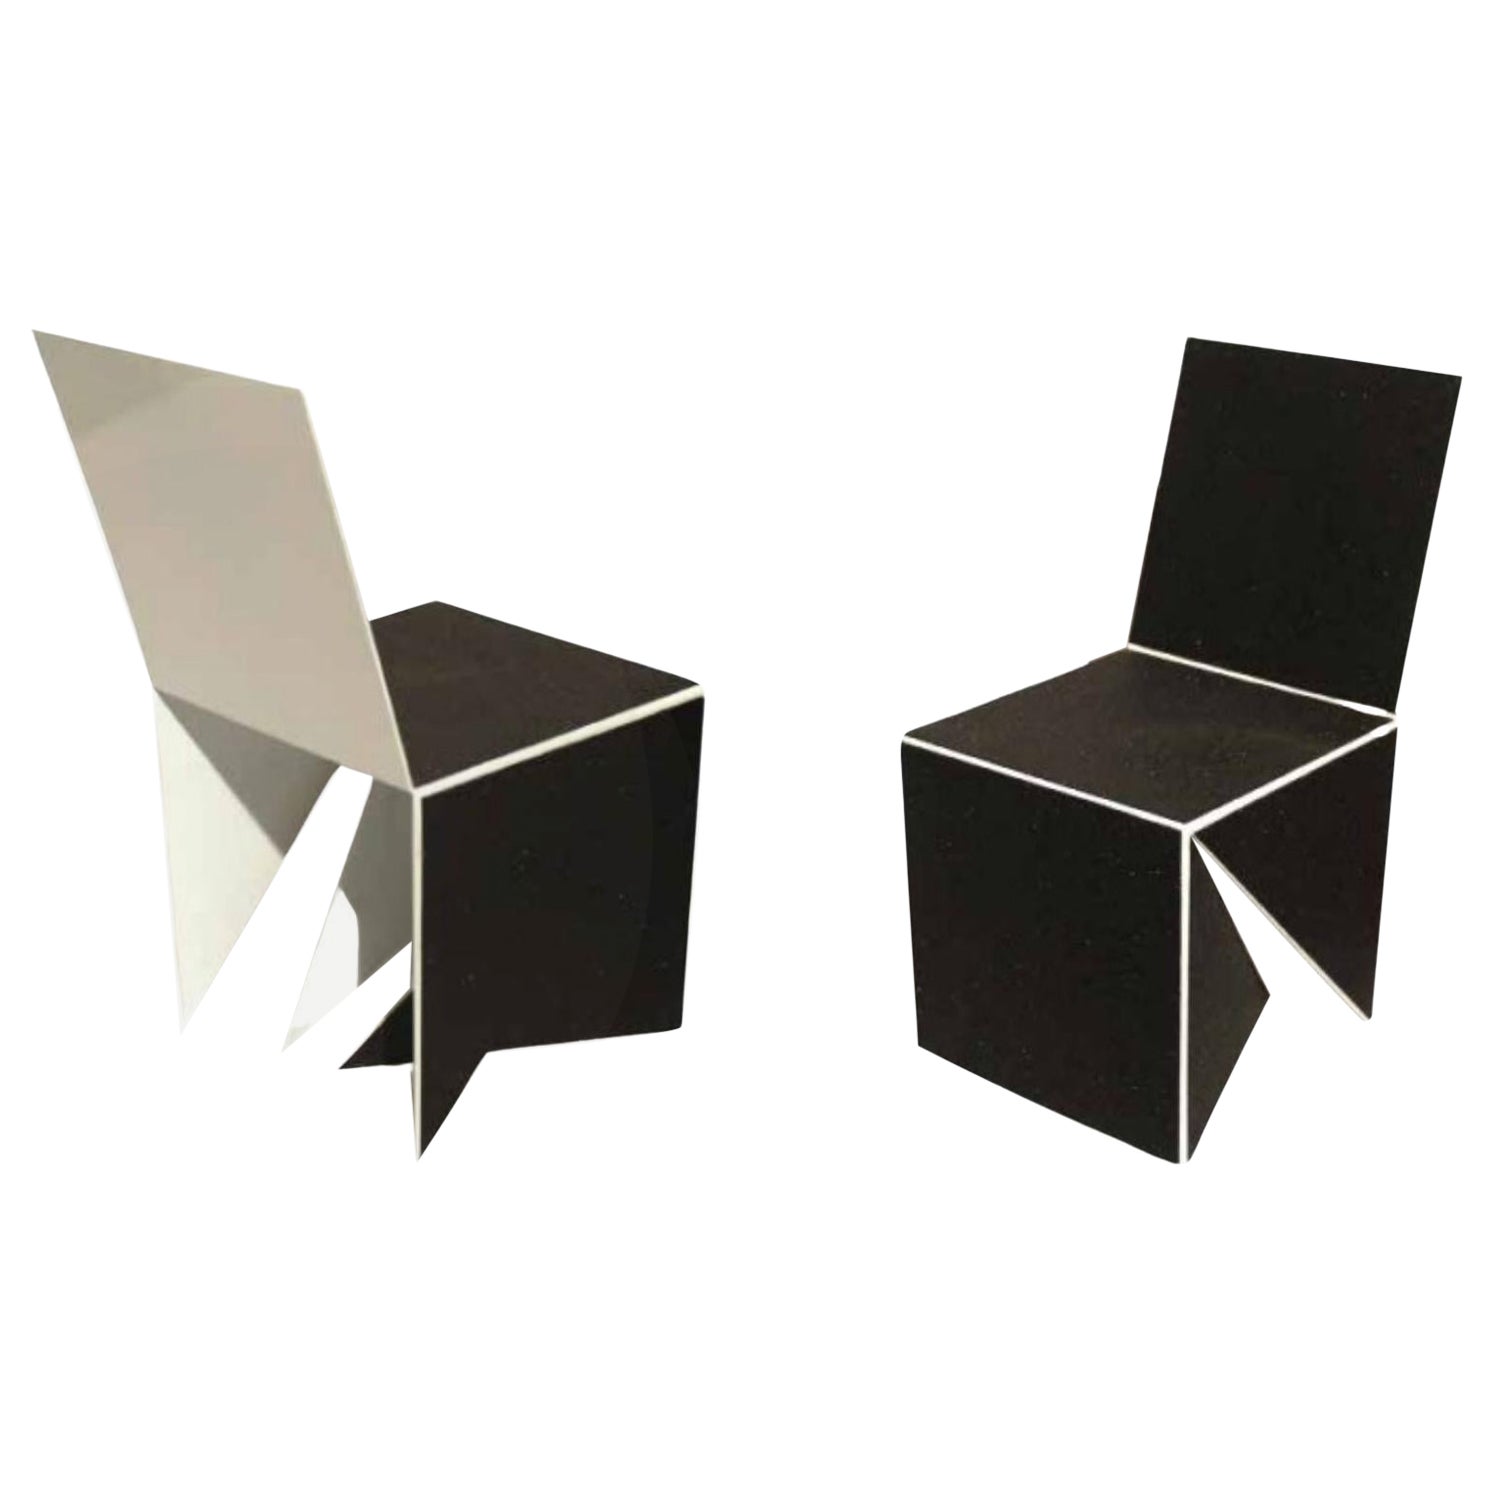 Set of 2 Casulo Cubes #2 by Mameluca For Sale